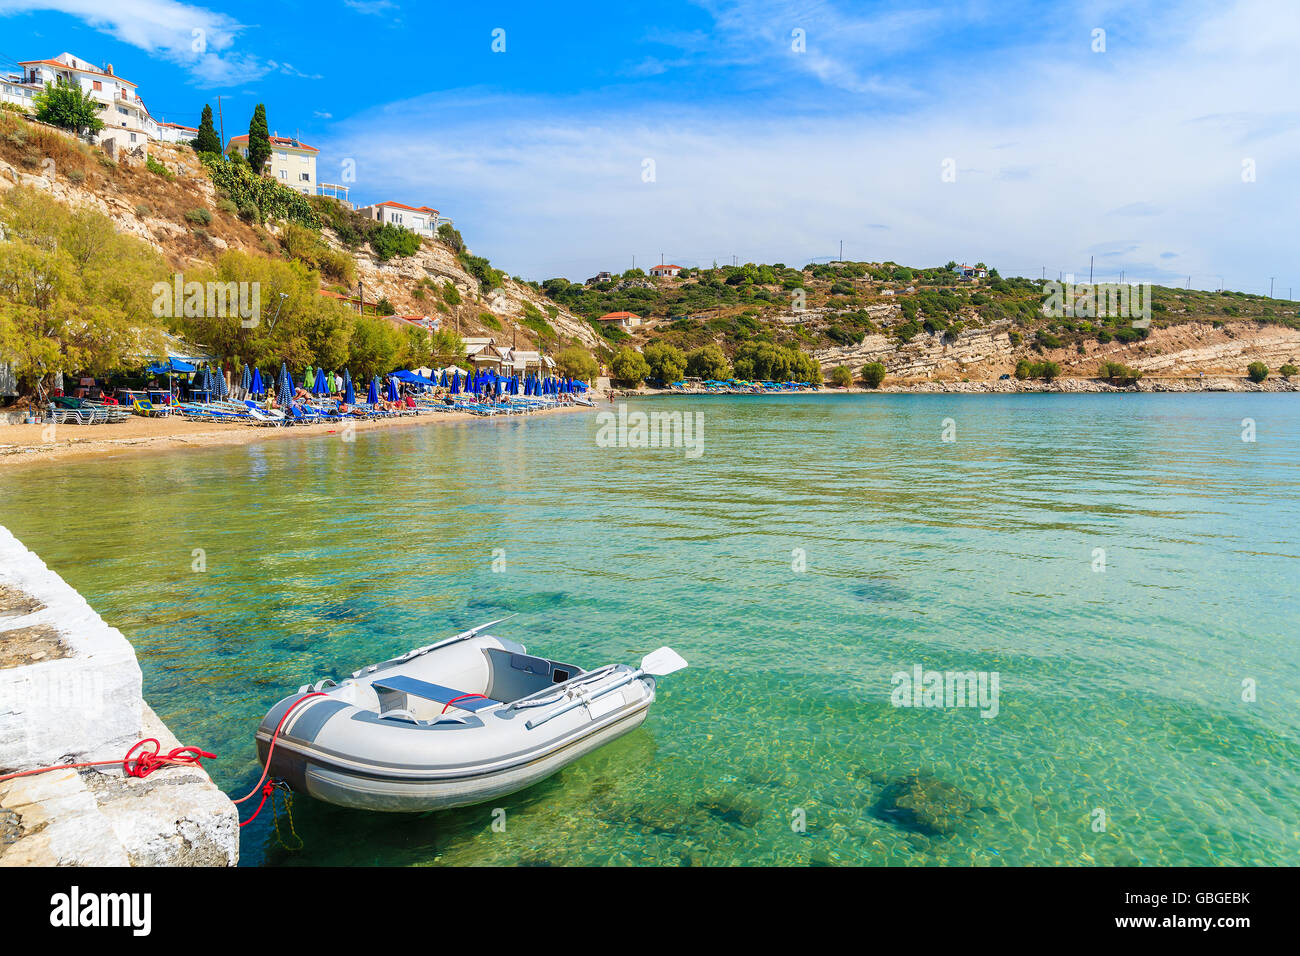 Dinghy boat on turquoise sea water at Pythagorion beach, Samos island, Greece Stock Photo